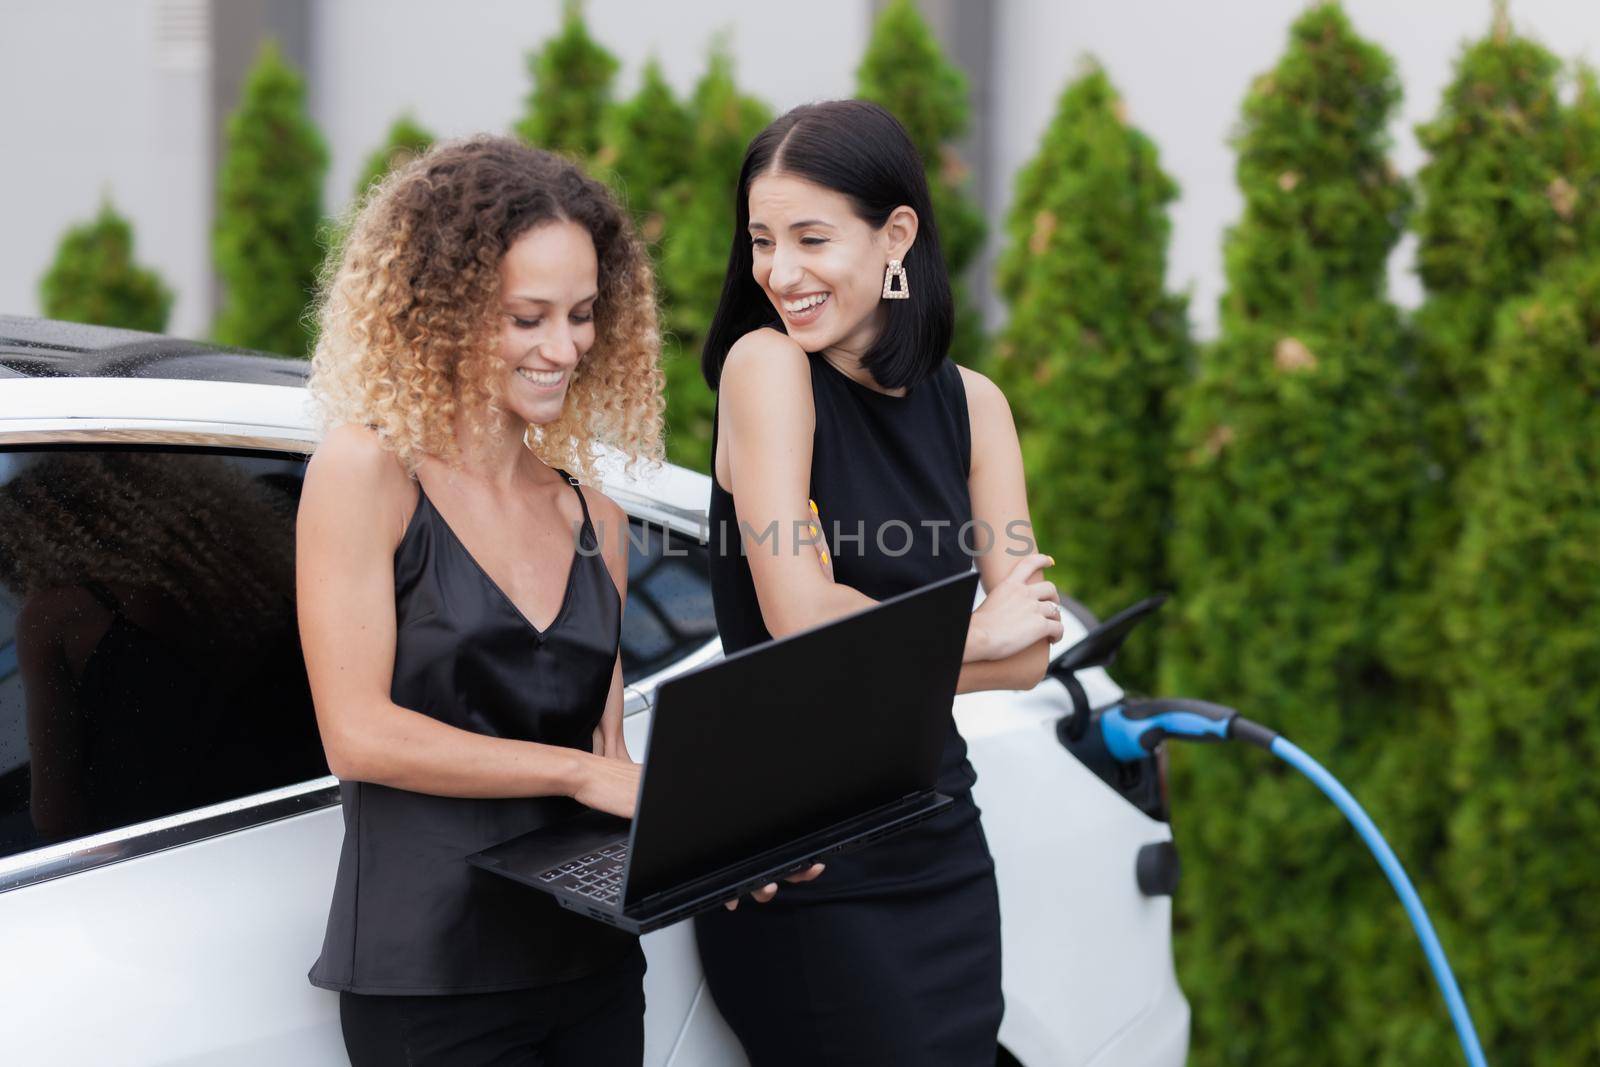 Two beautiful girls in black outfut smiling and posing. Businesswomen working on laptop while their electric car is charging in the background.